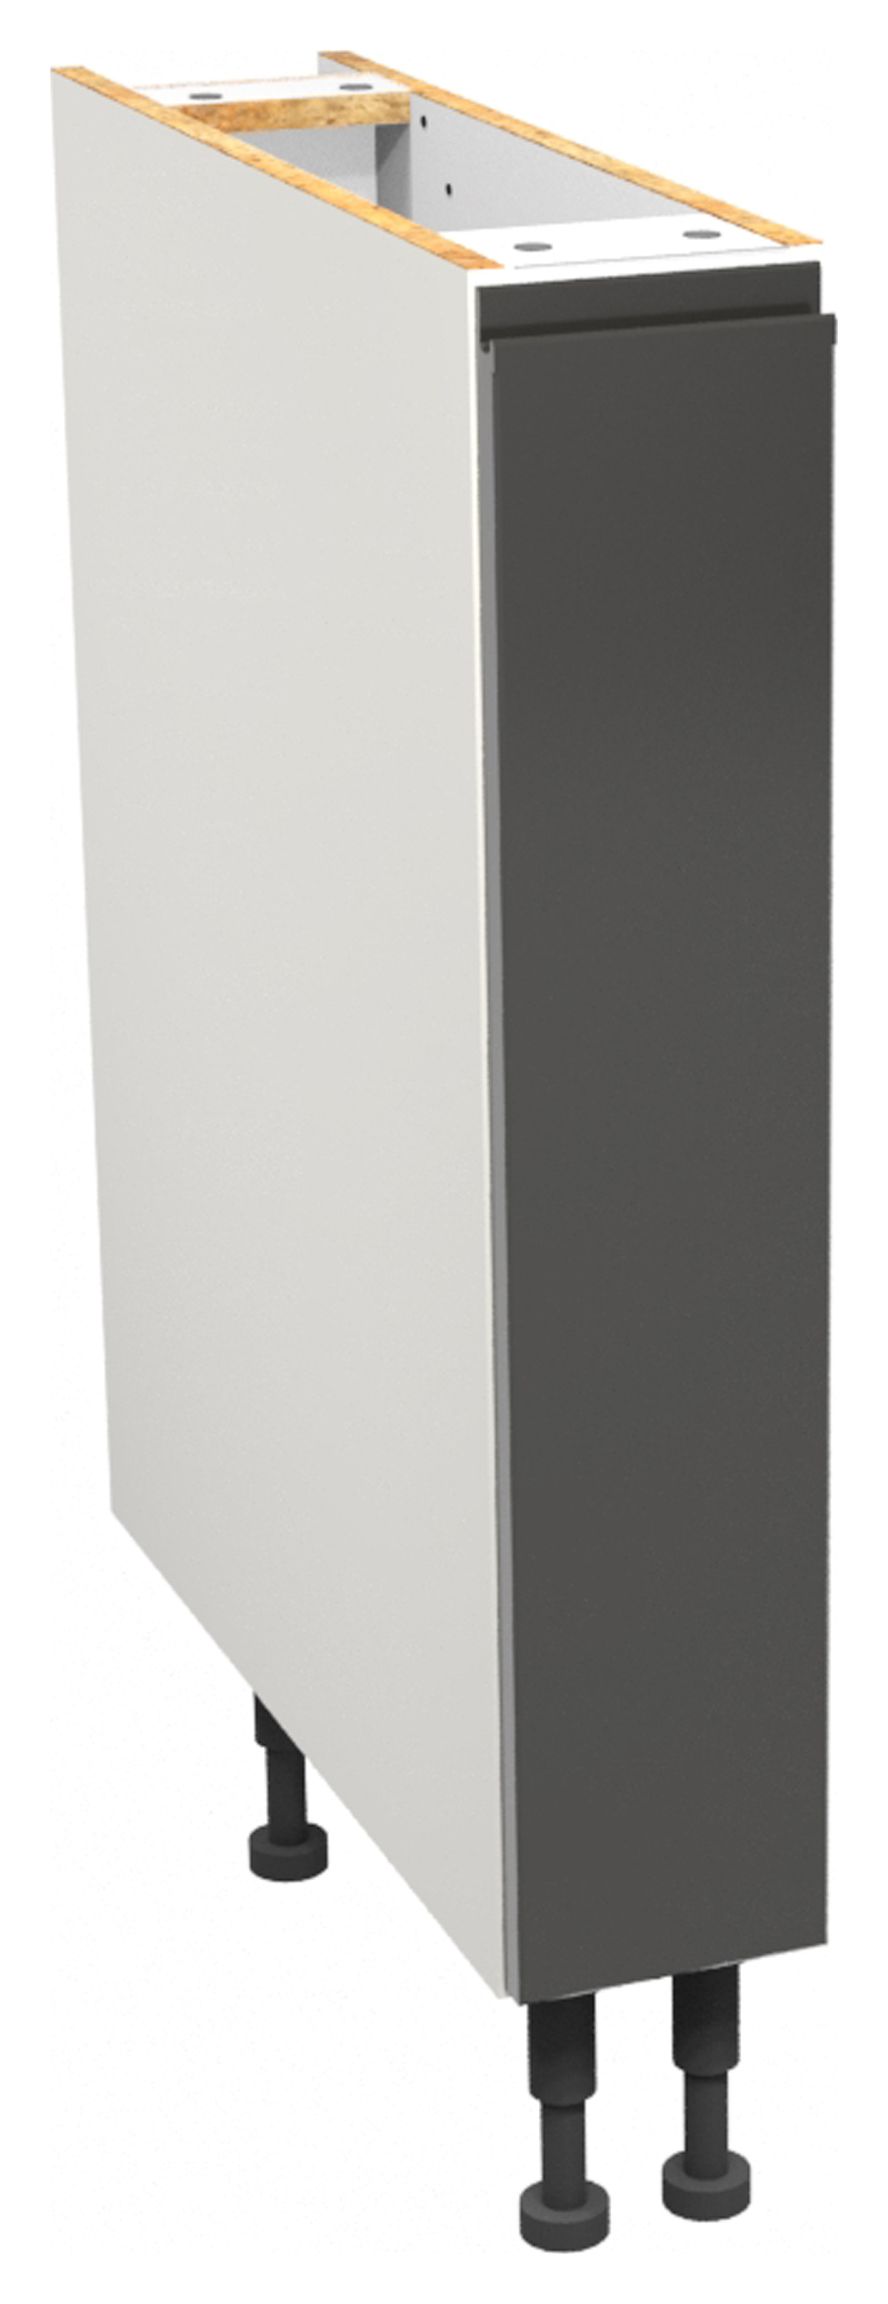 Image of Madison Dark Grey Gloss Pull Out Base Unit - 150mm